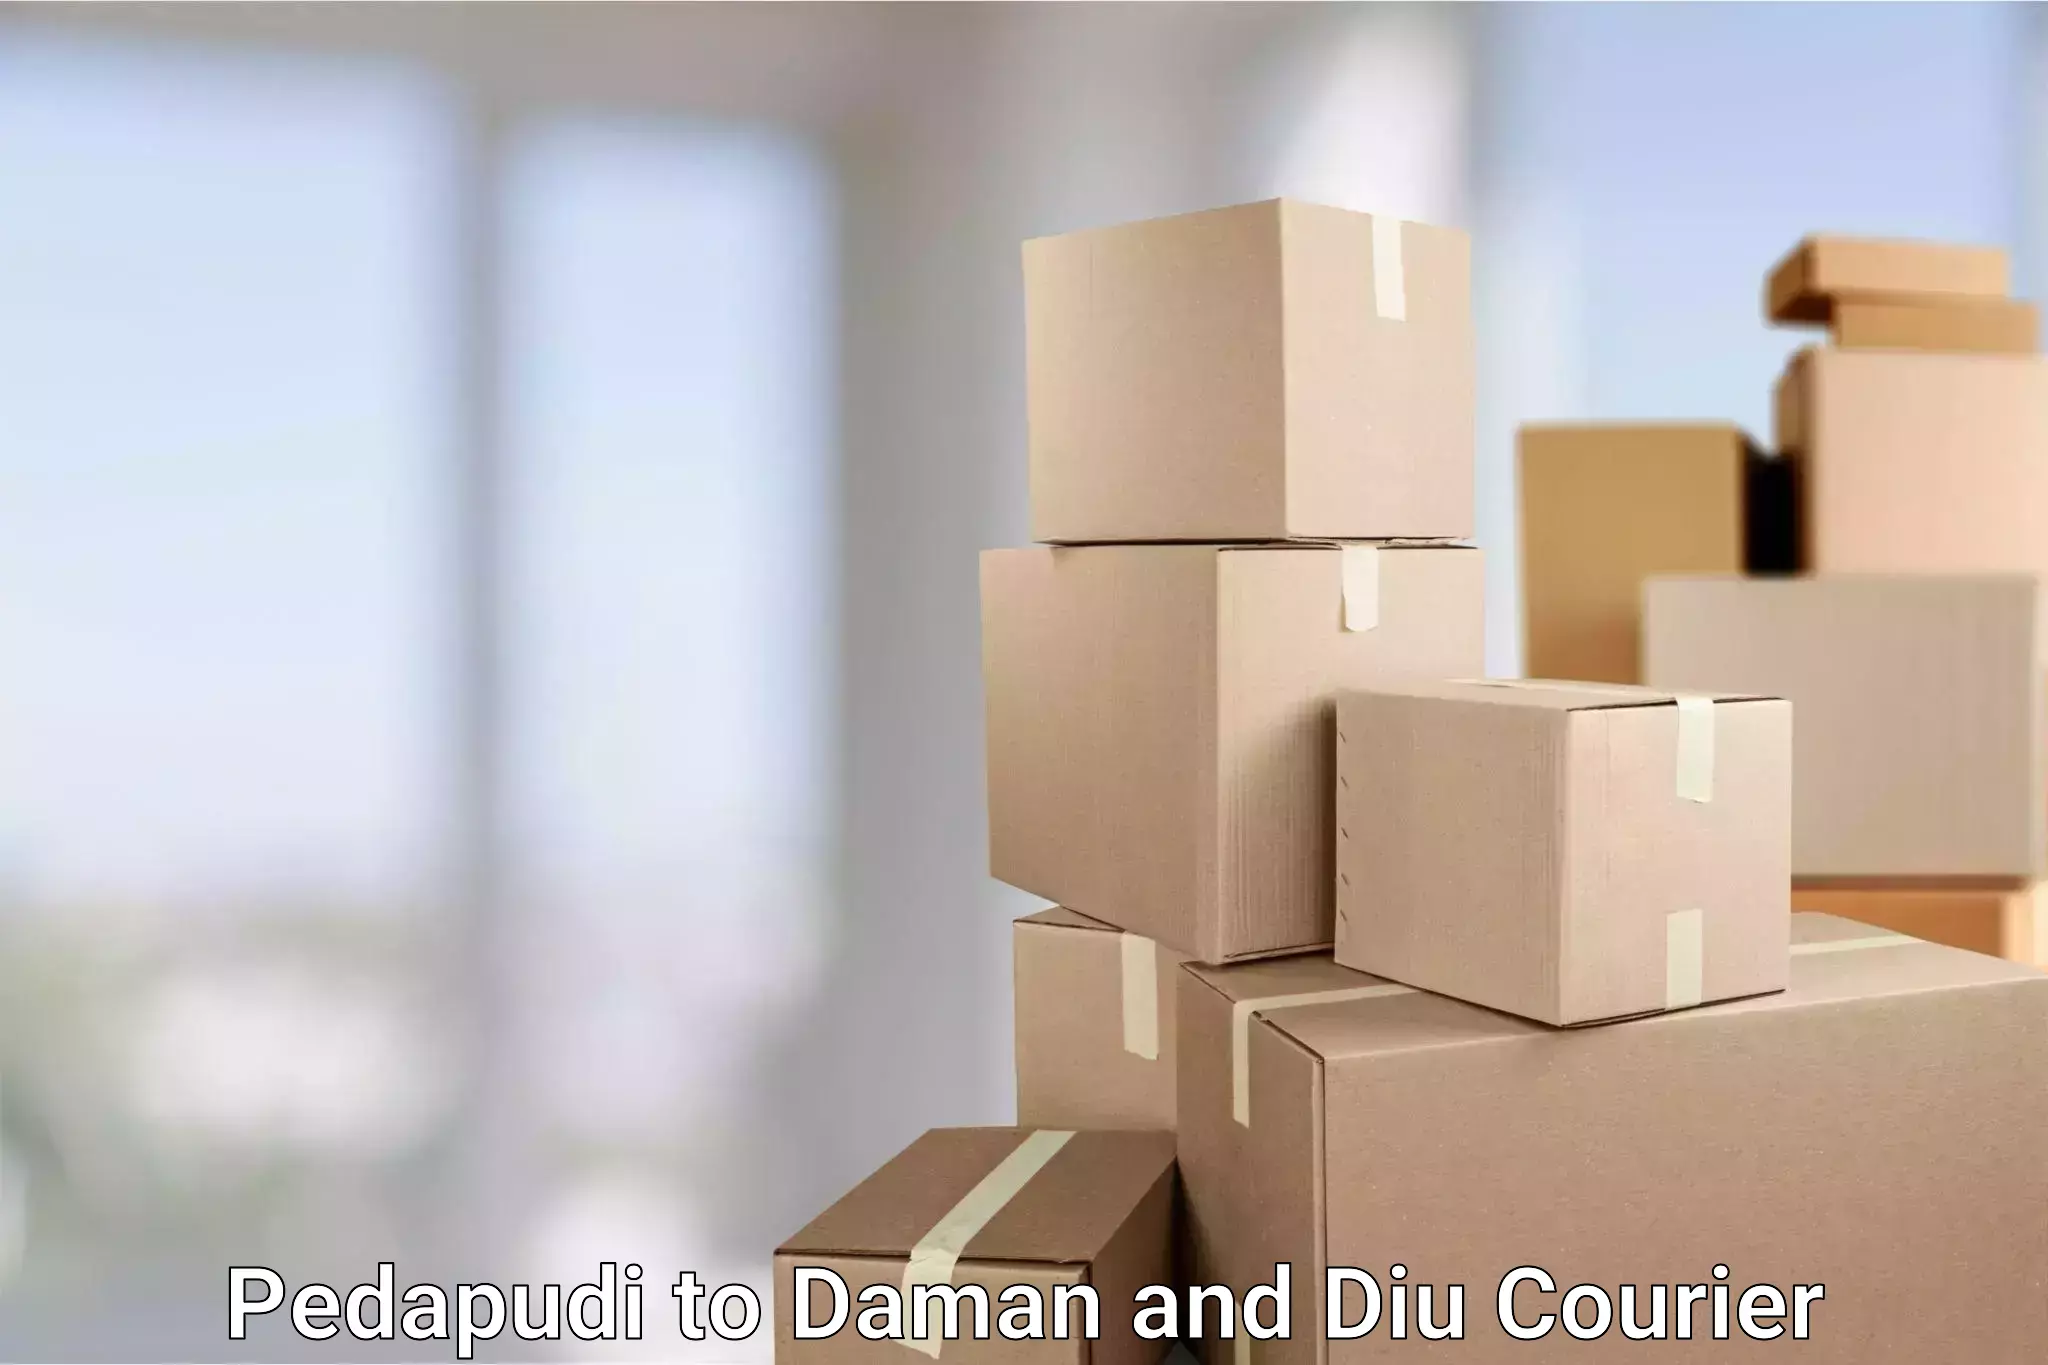 Bulk courier orders Pedapudi to Daman